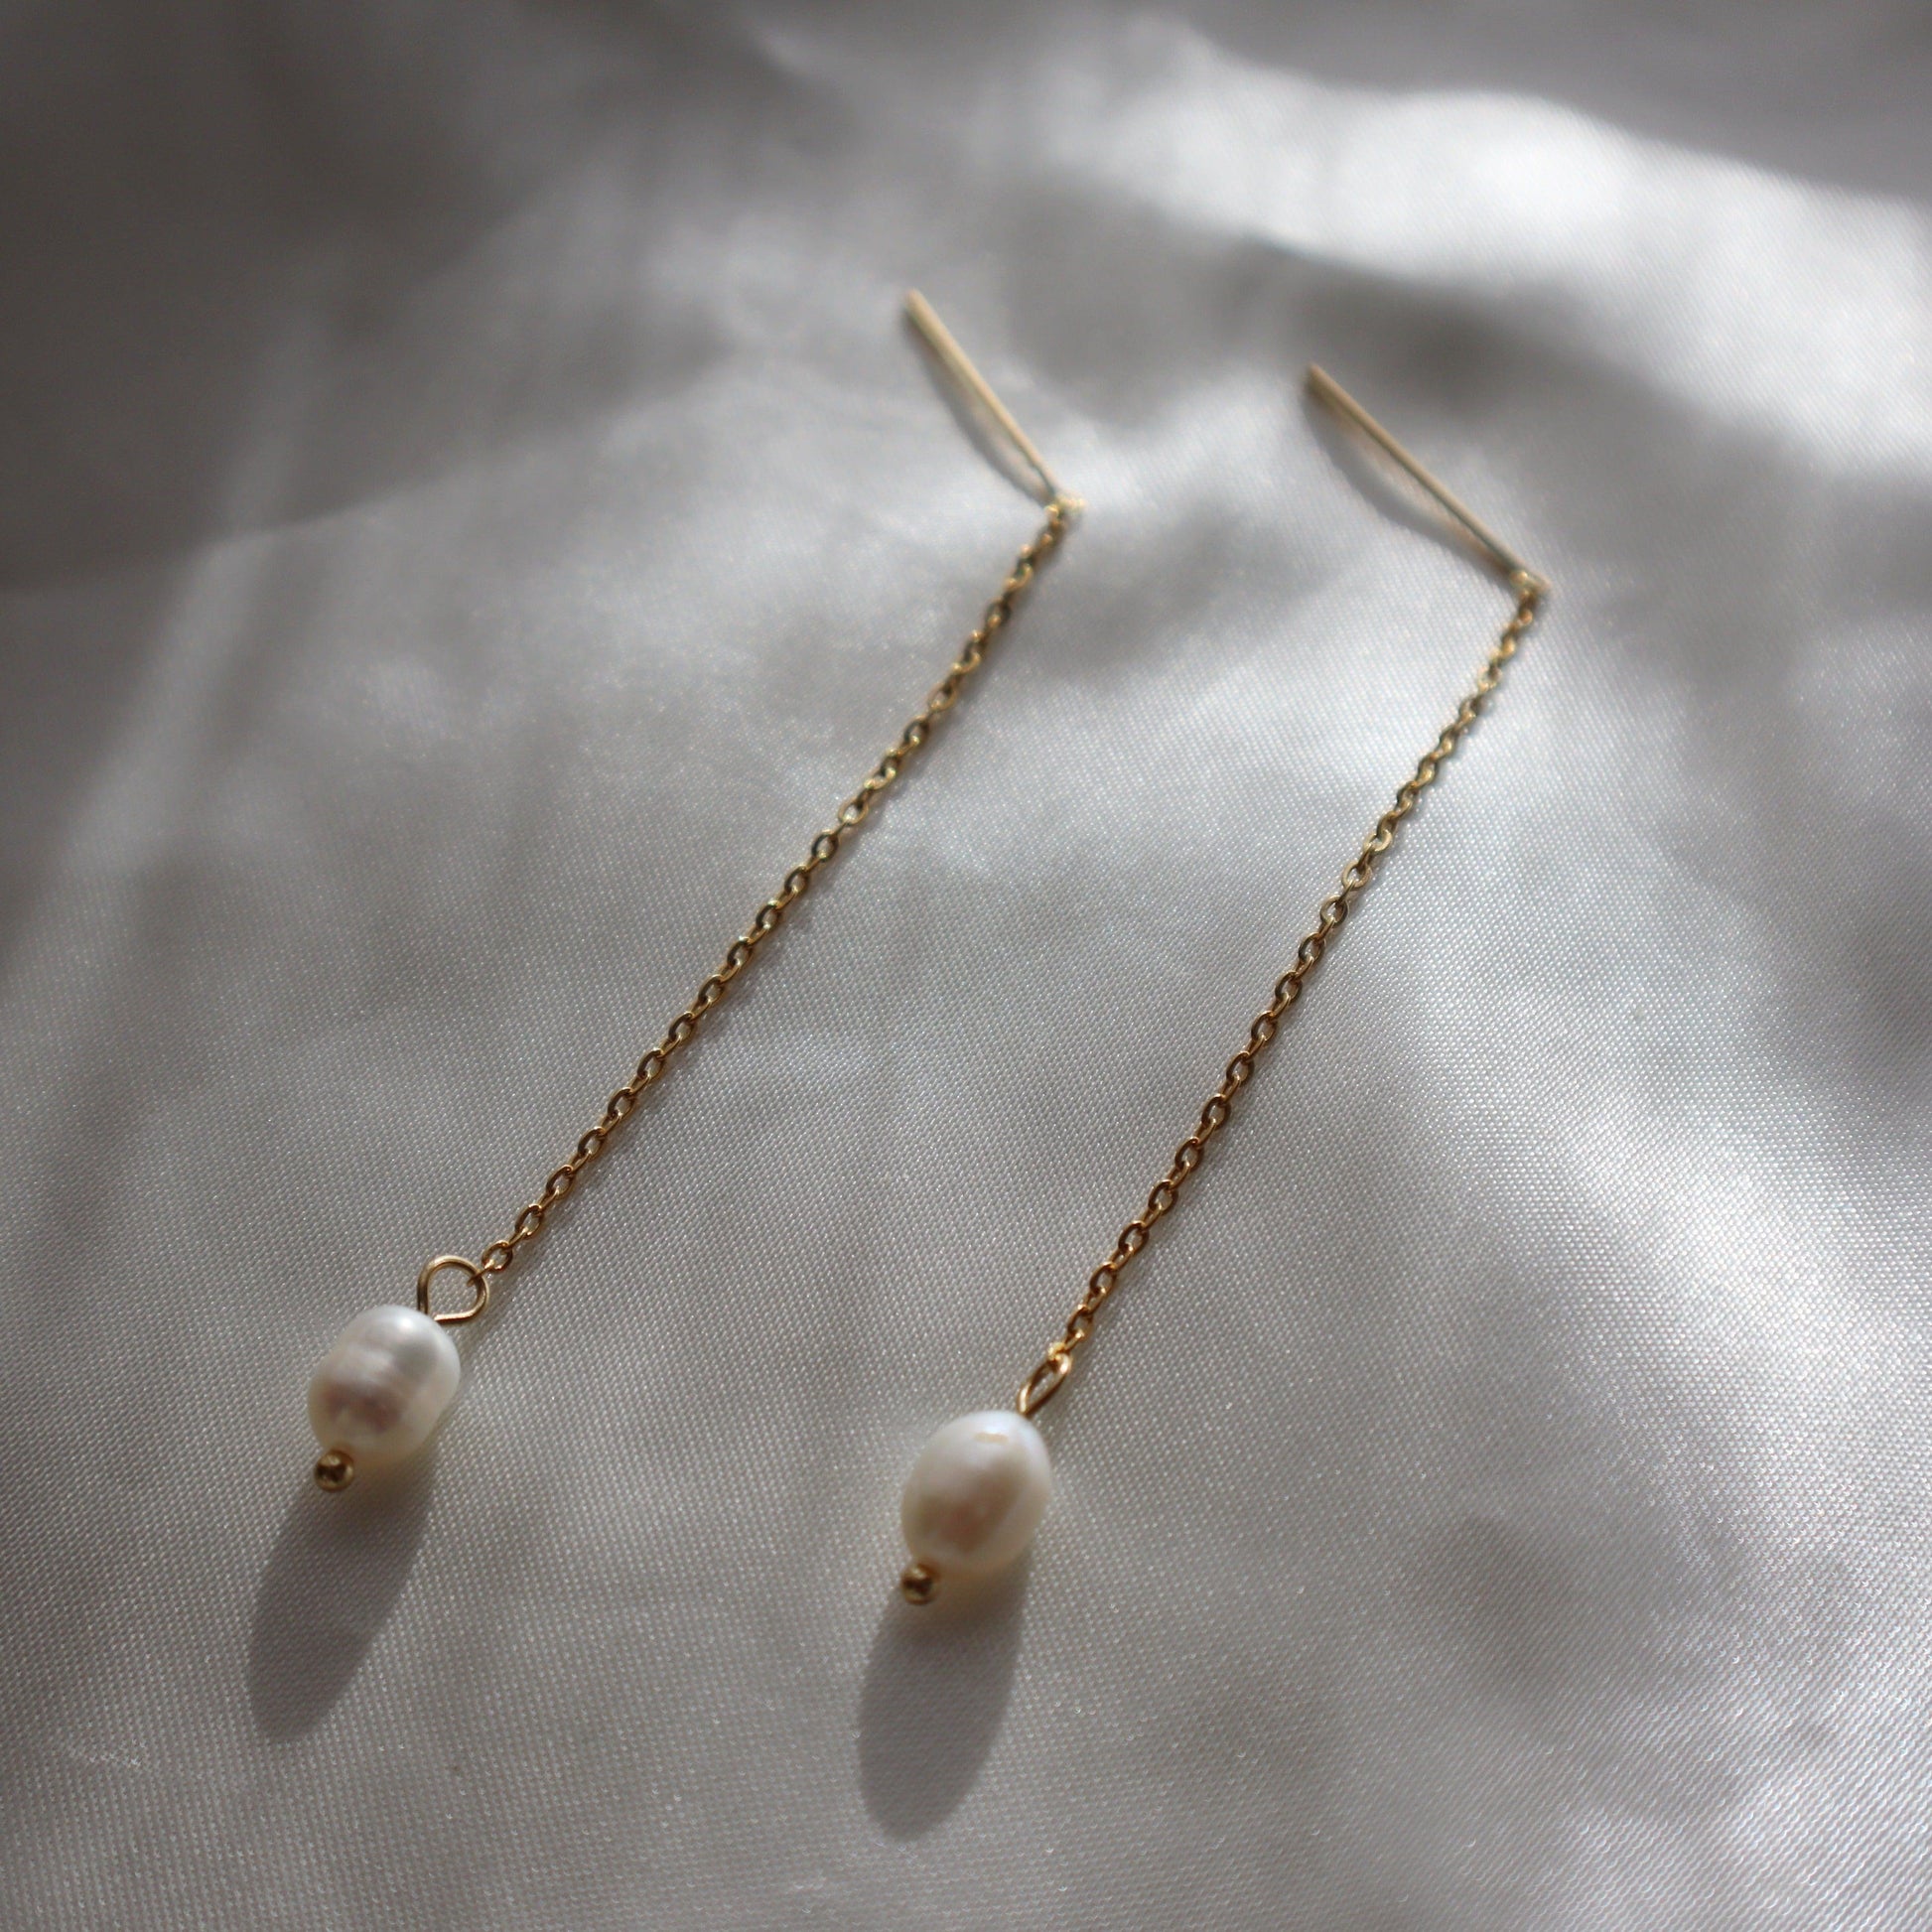 Pearl Drop Threaders | Drop Earring - JESSA JEWELRY | GOLD JEWELRY; dainty, affordable gold everyday jewelry. Tarnish free, water-resistant, hypoallergenic. Jewelry for everyday wear